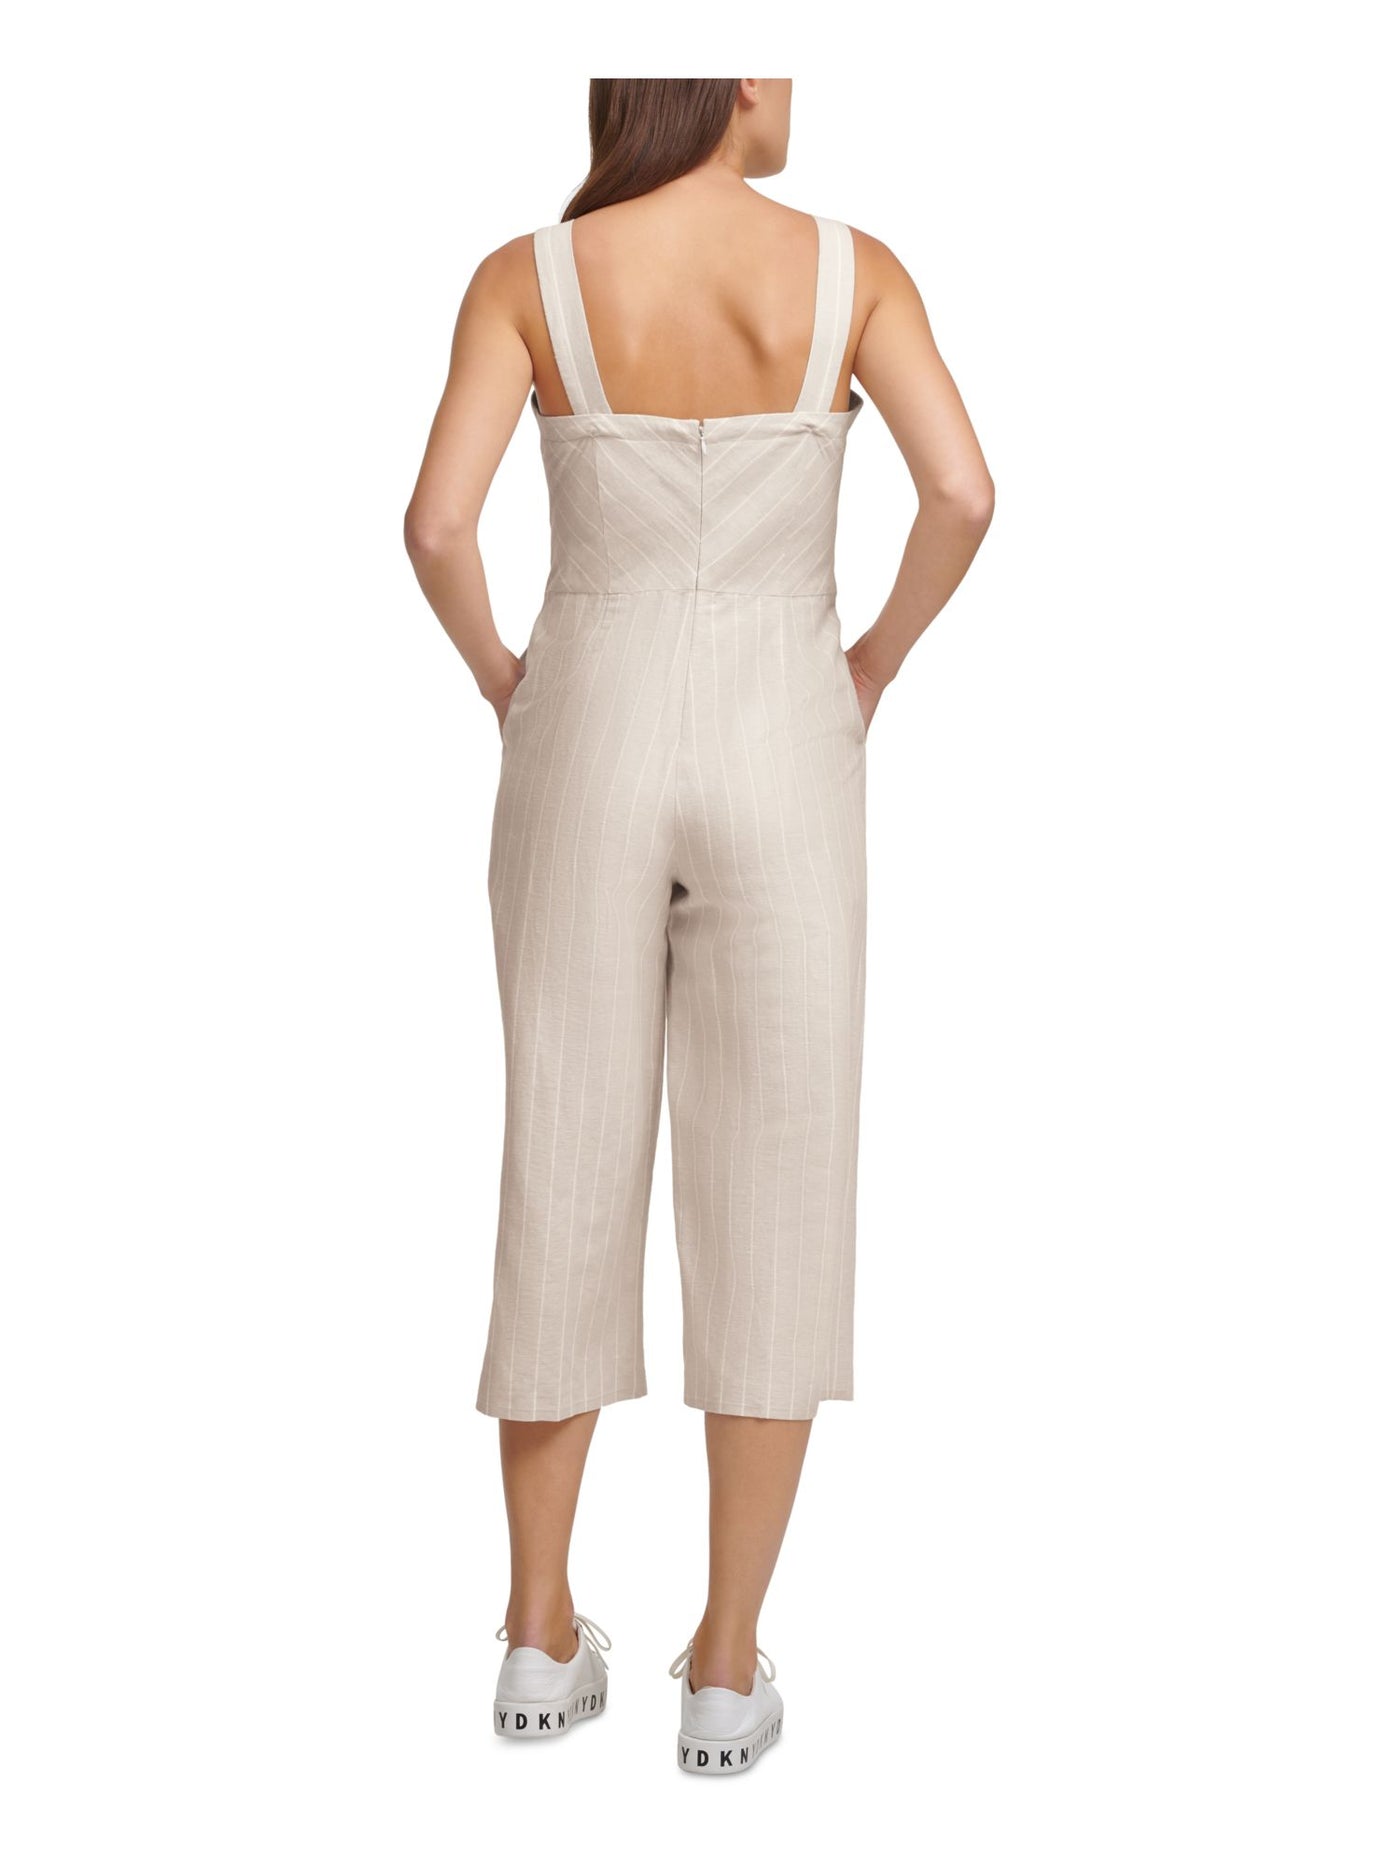 DKNY Womens Zippered Pocketed Tie Front Sleeveless Square Neck Wide Leg Jumpsuit